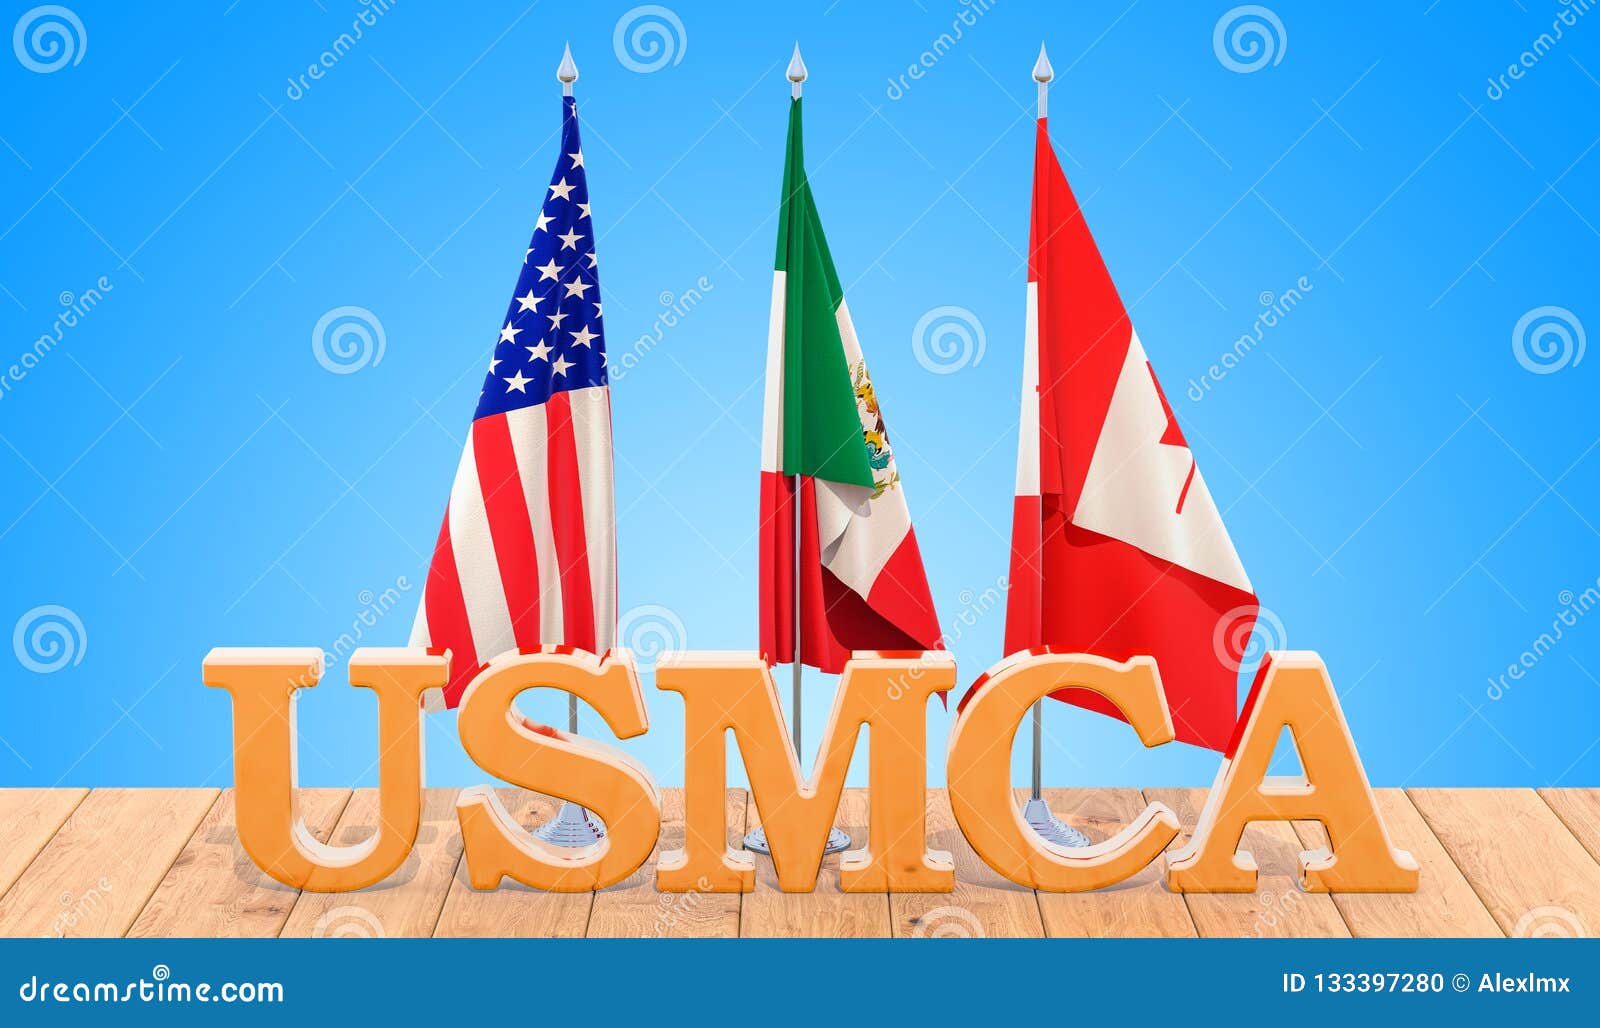 united states mexico canada agreement, usmca concept on the wood